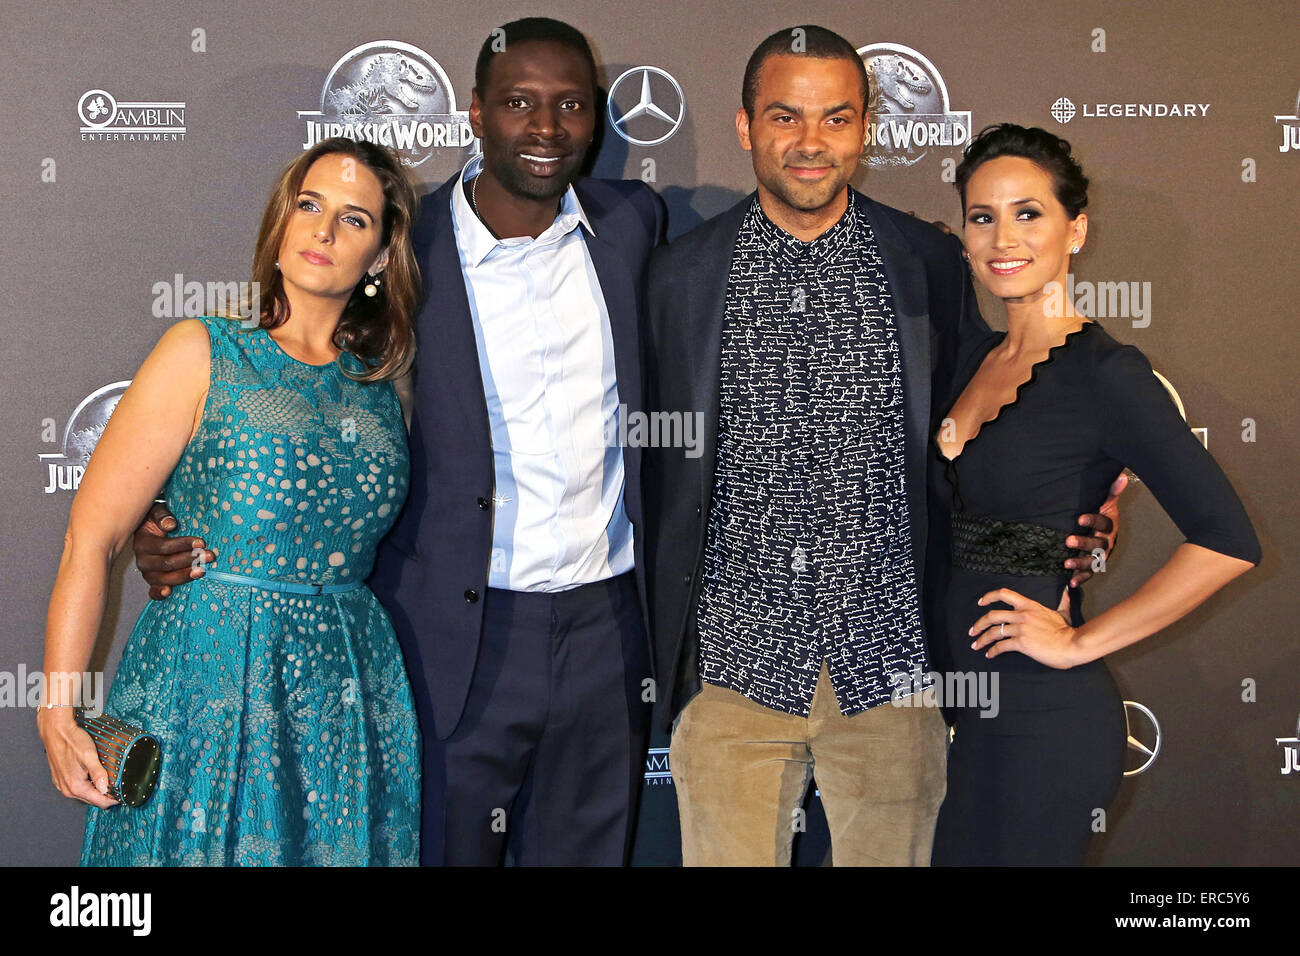 French actor Omar Sy together with his wife Helene Sy and Tony Parker with his wife Axelle Francine attend the premiere of the movie 'Jurassic World' at the UGC Normandie in Paris. On 29 of May, 2015./picture alliance Stock Photo